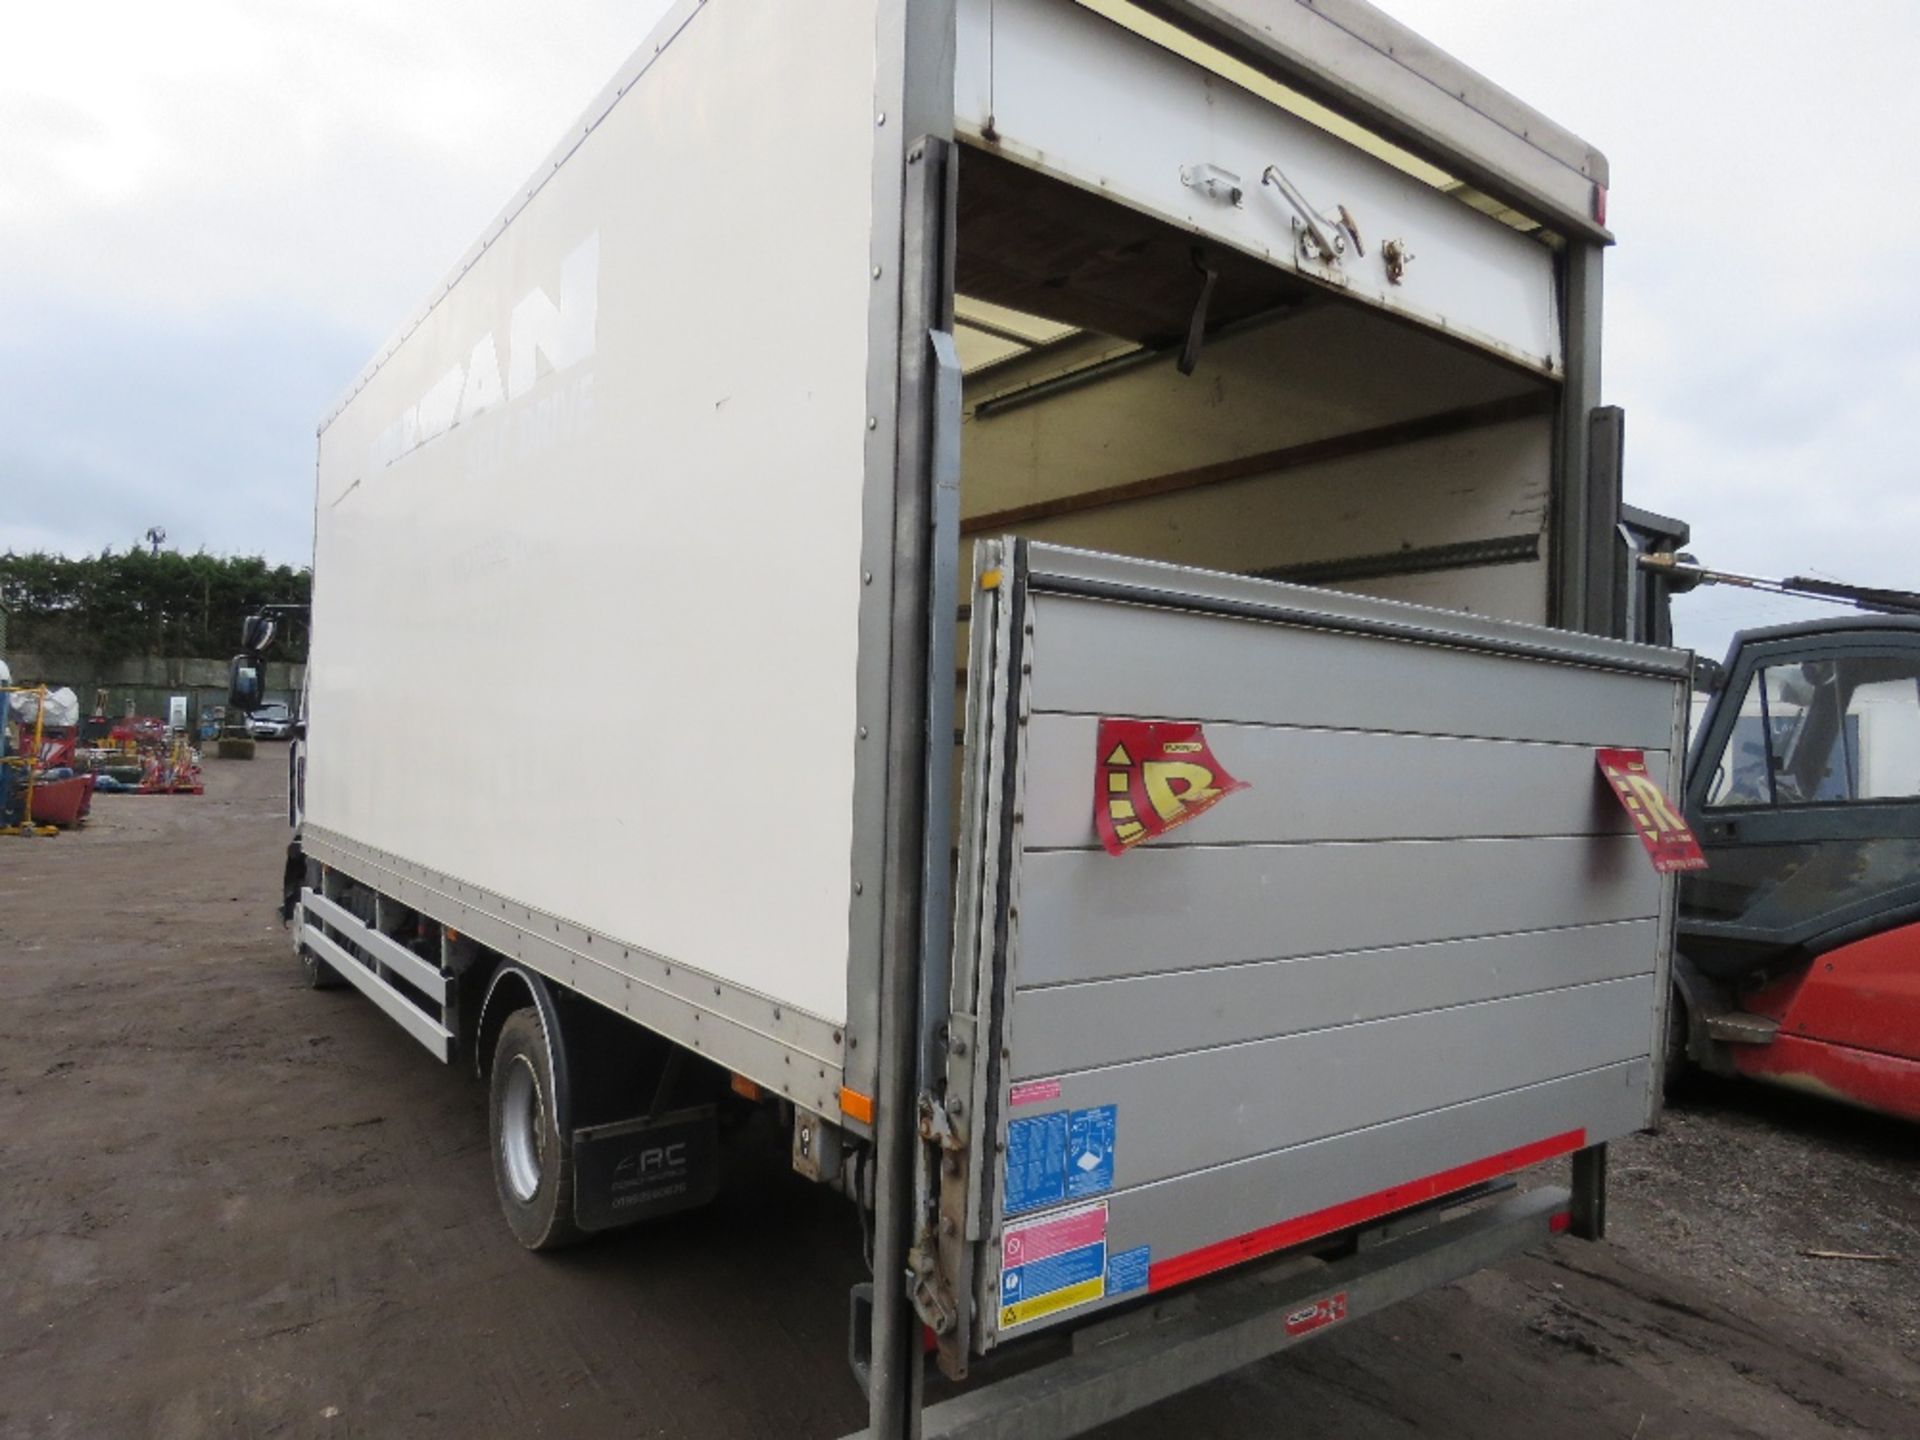 RENAULT D75 BOX LORRY REG:KE19 VVN. 7500KG RATED, DIRECT FROM LOCAL COMPANY WHO ARE SELLING DUE TO A - Image 6 of 16